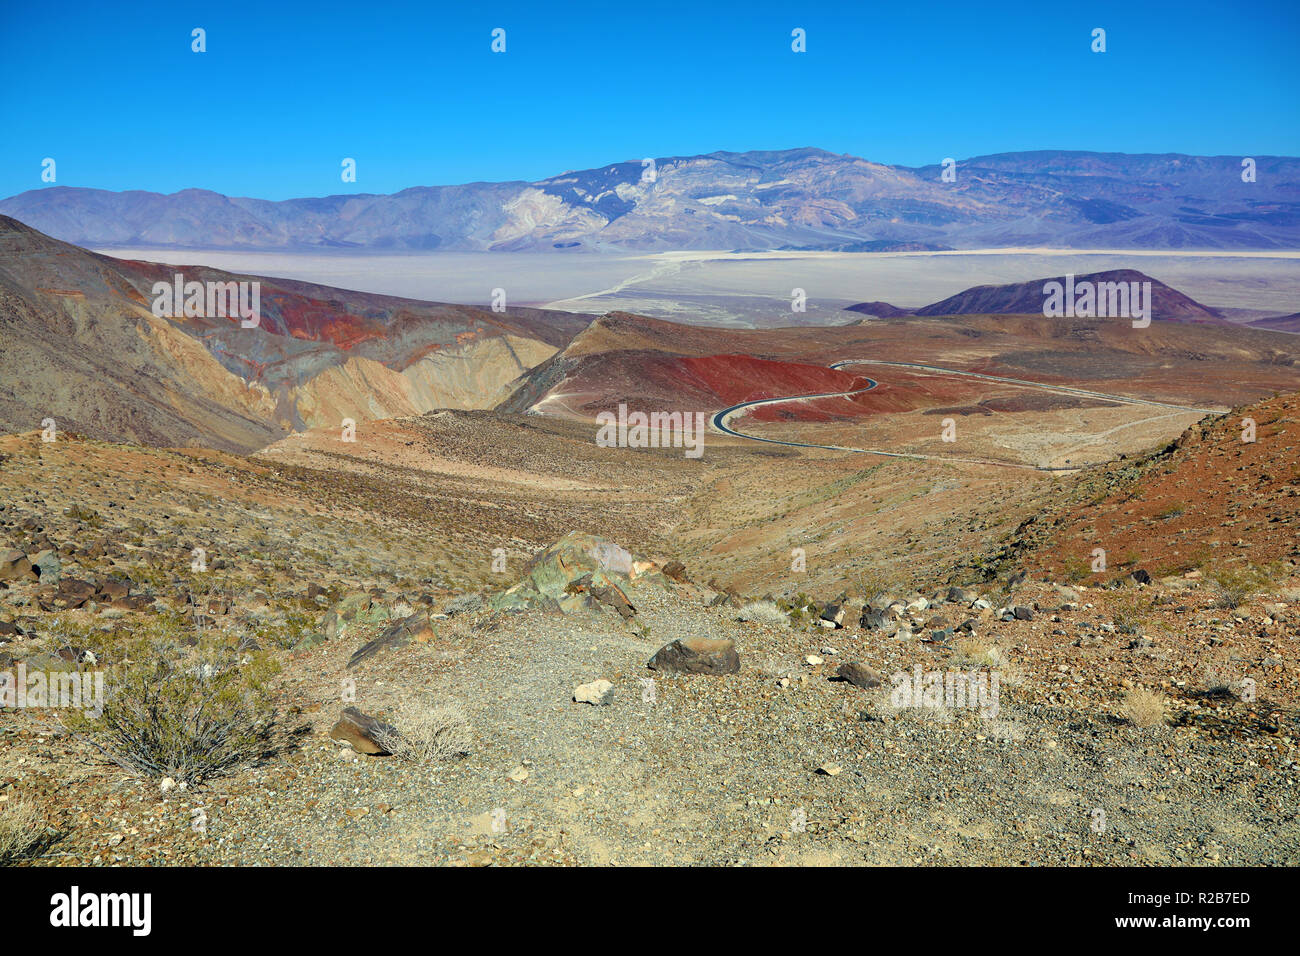 Barren landscape of Death Valley National Park, California, United States of America Stock Photo